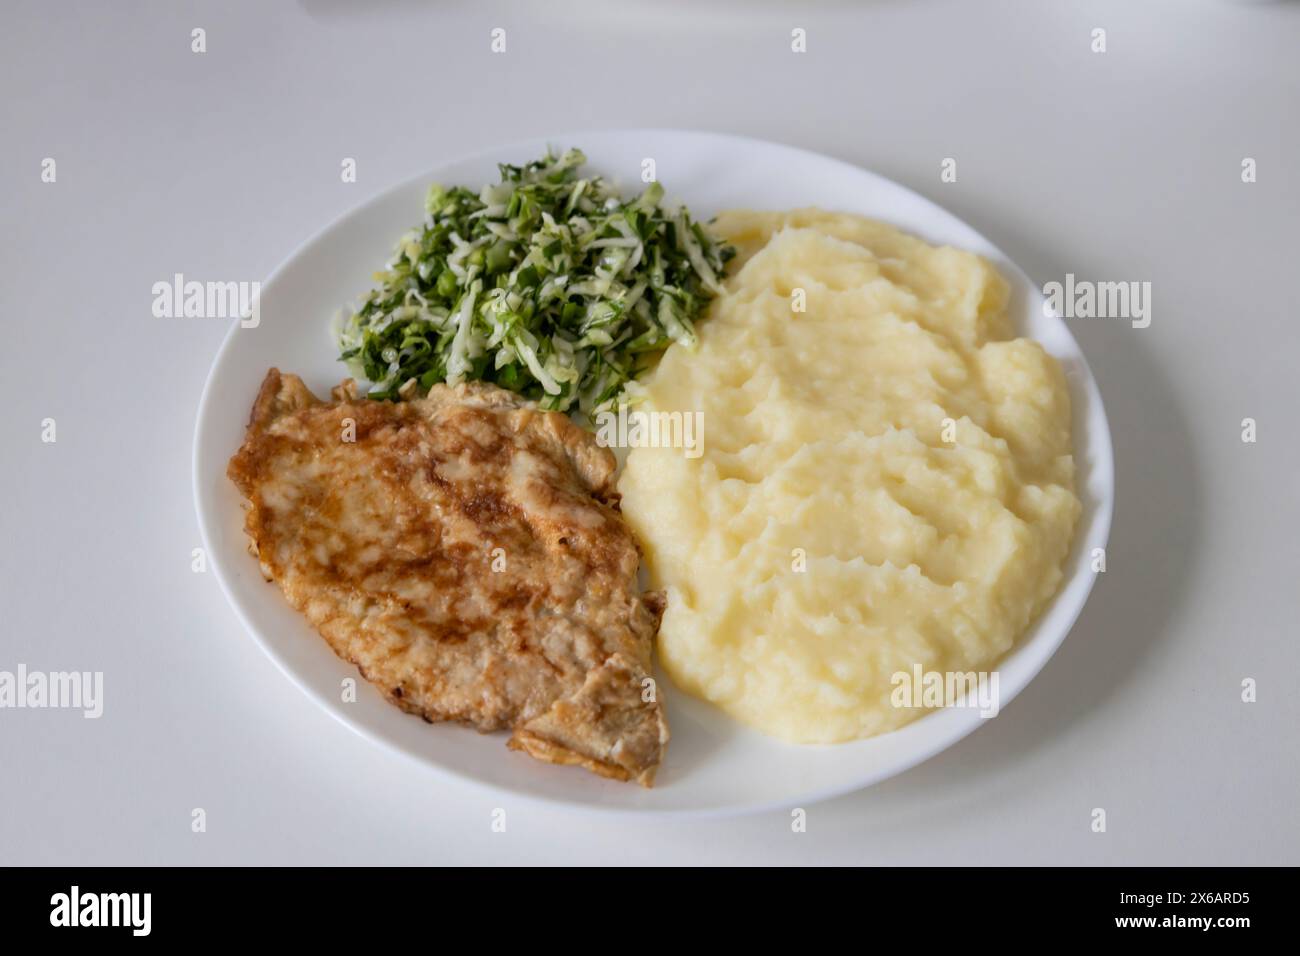 A delicious breakfast or lunch with mashed potatoes, chop with salad - green onions and green young cabbage, parsley on the white plate. Stock Photo